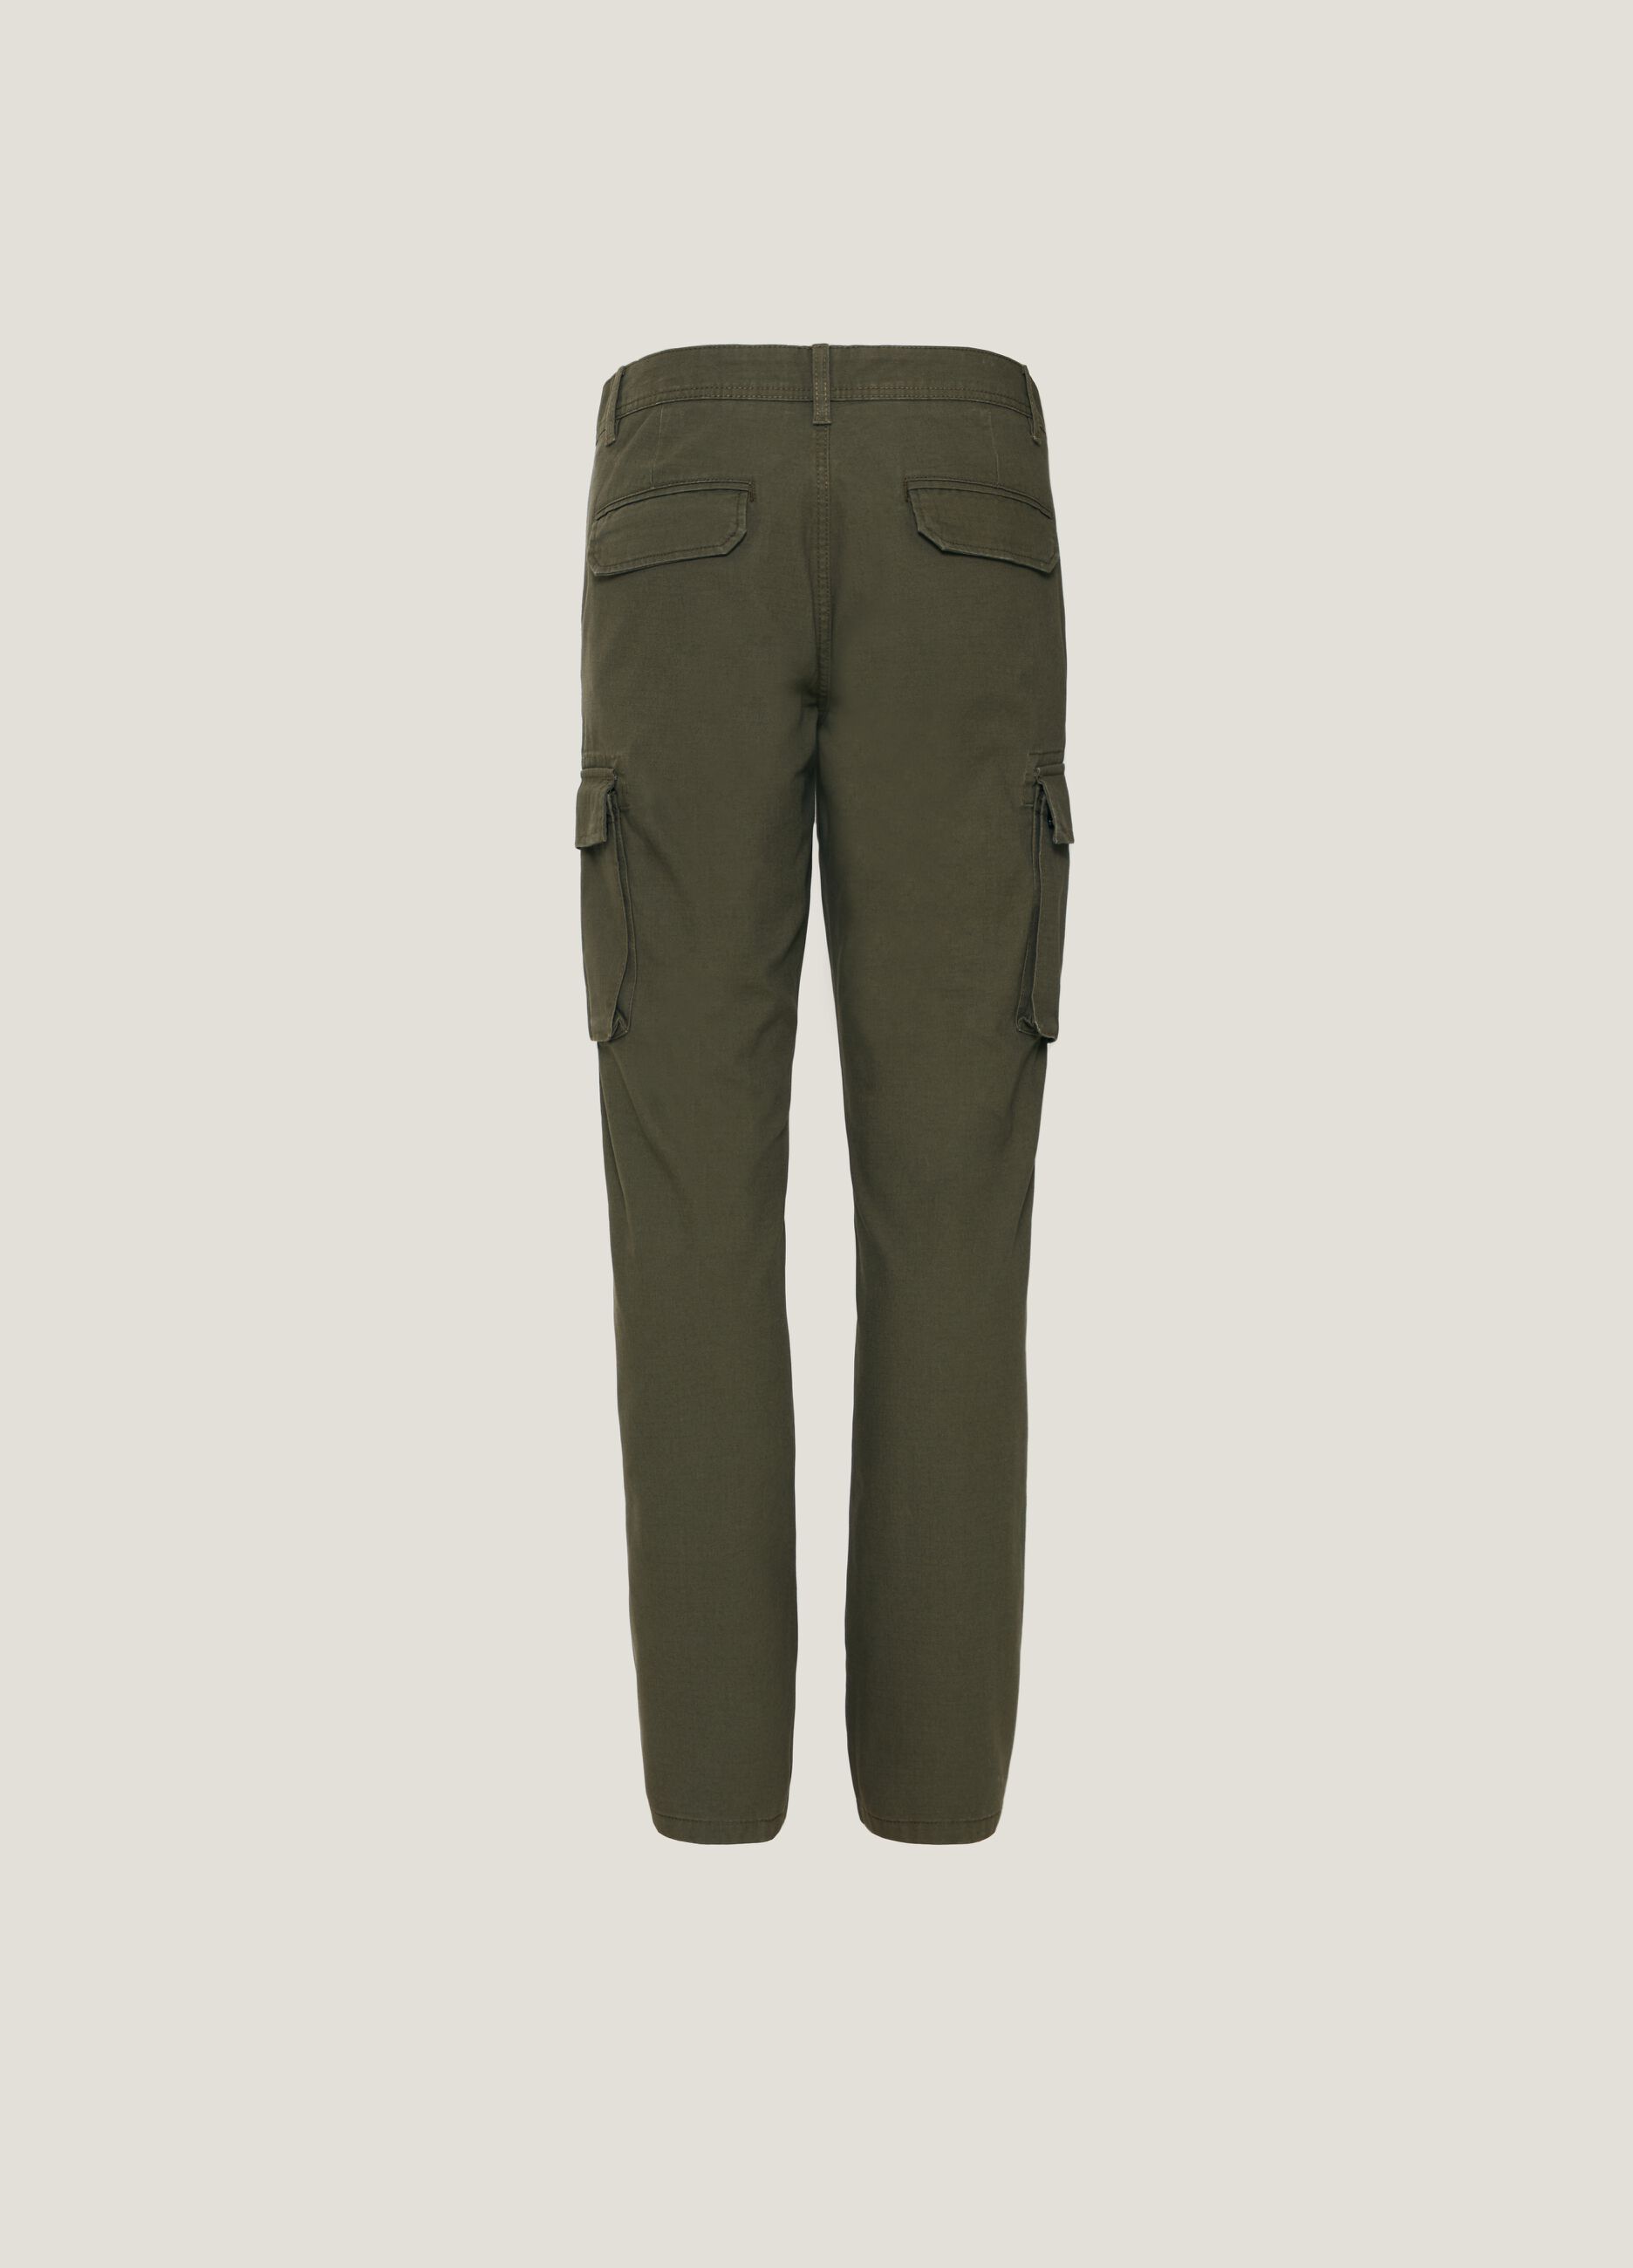 Man's Forest Green Cotton ripstop cargo trousers